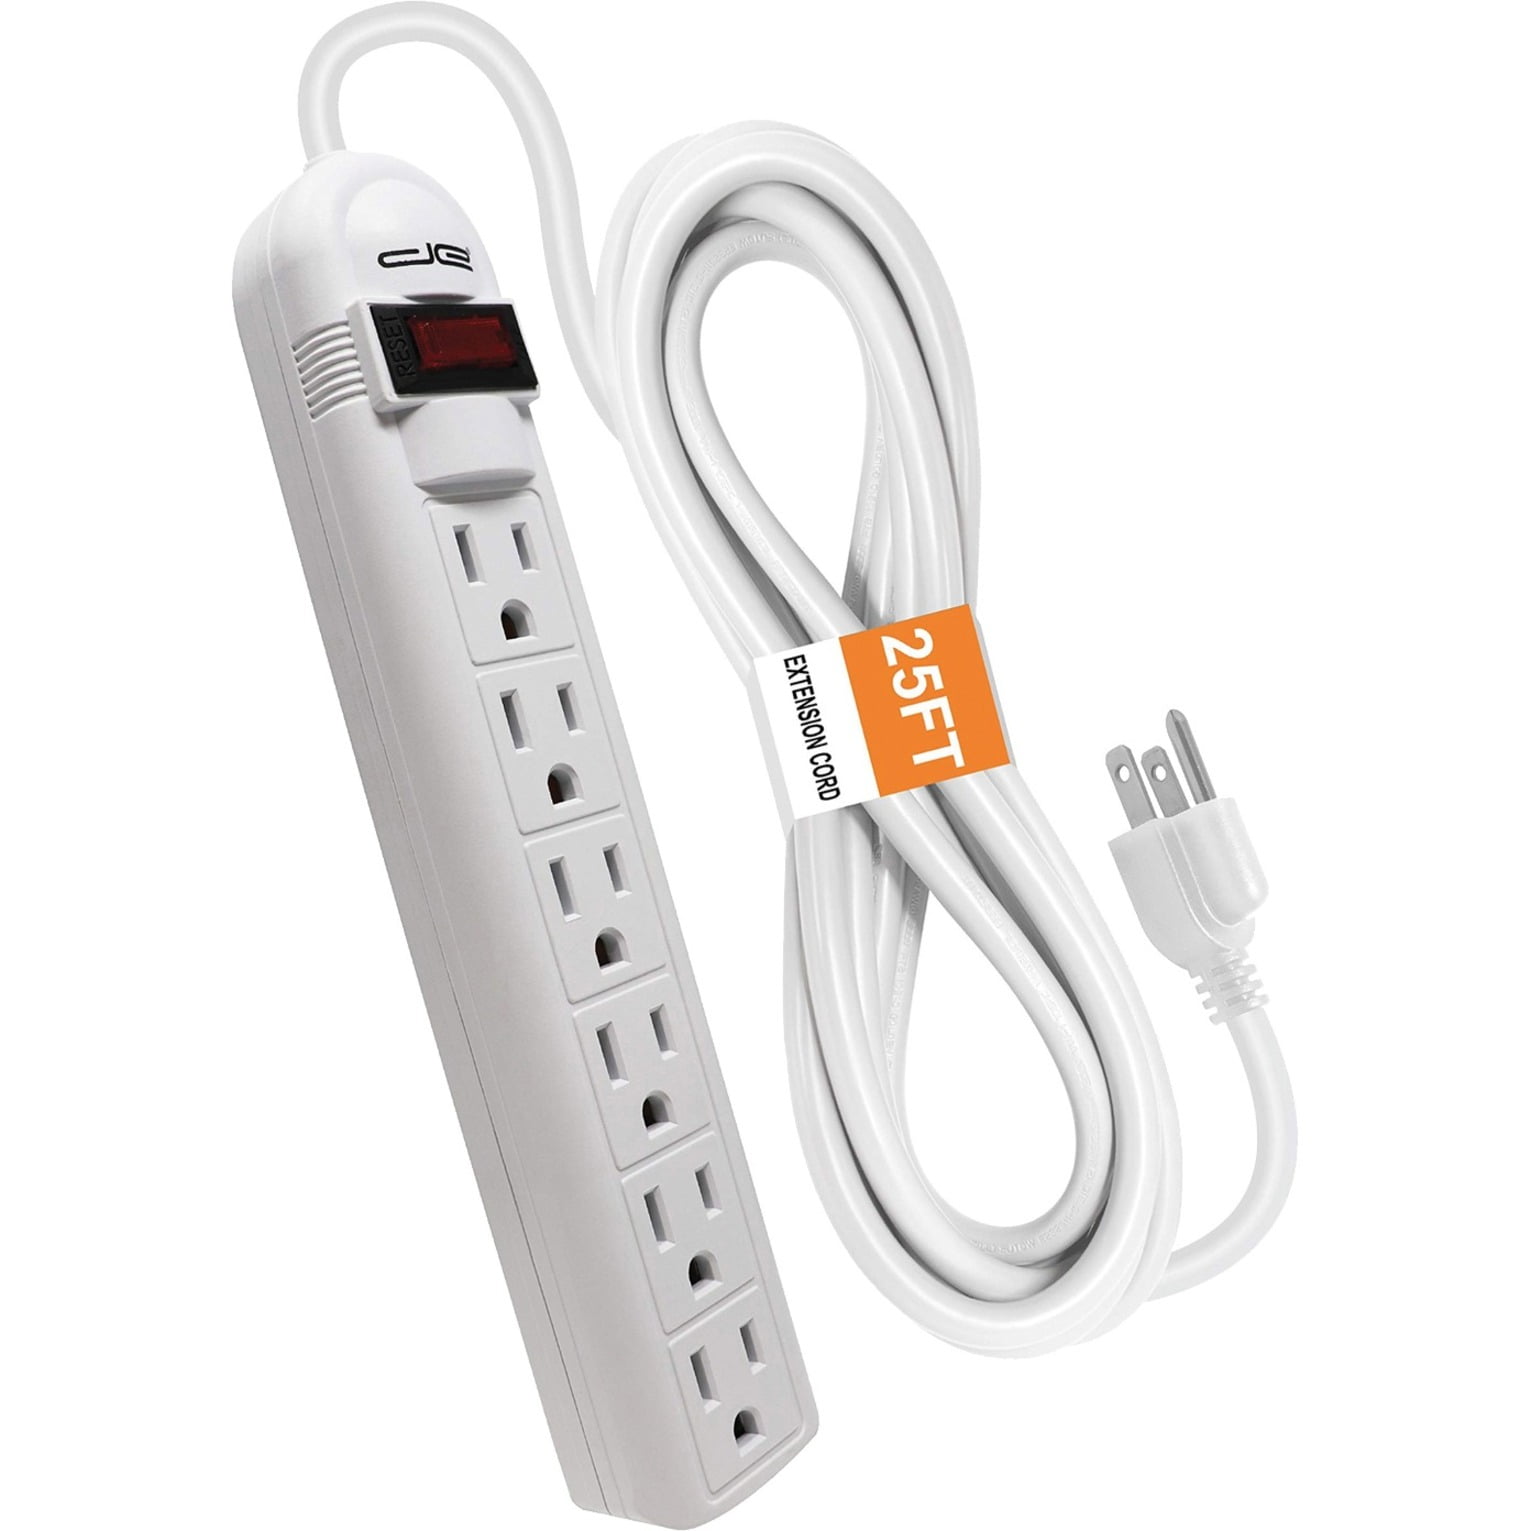 Digital Energy 6-Outlet Surge Protector Power Strip with 25-Feet Long  Extension Cord, White